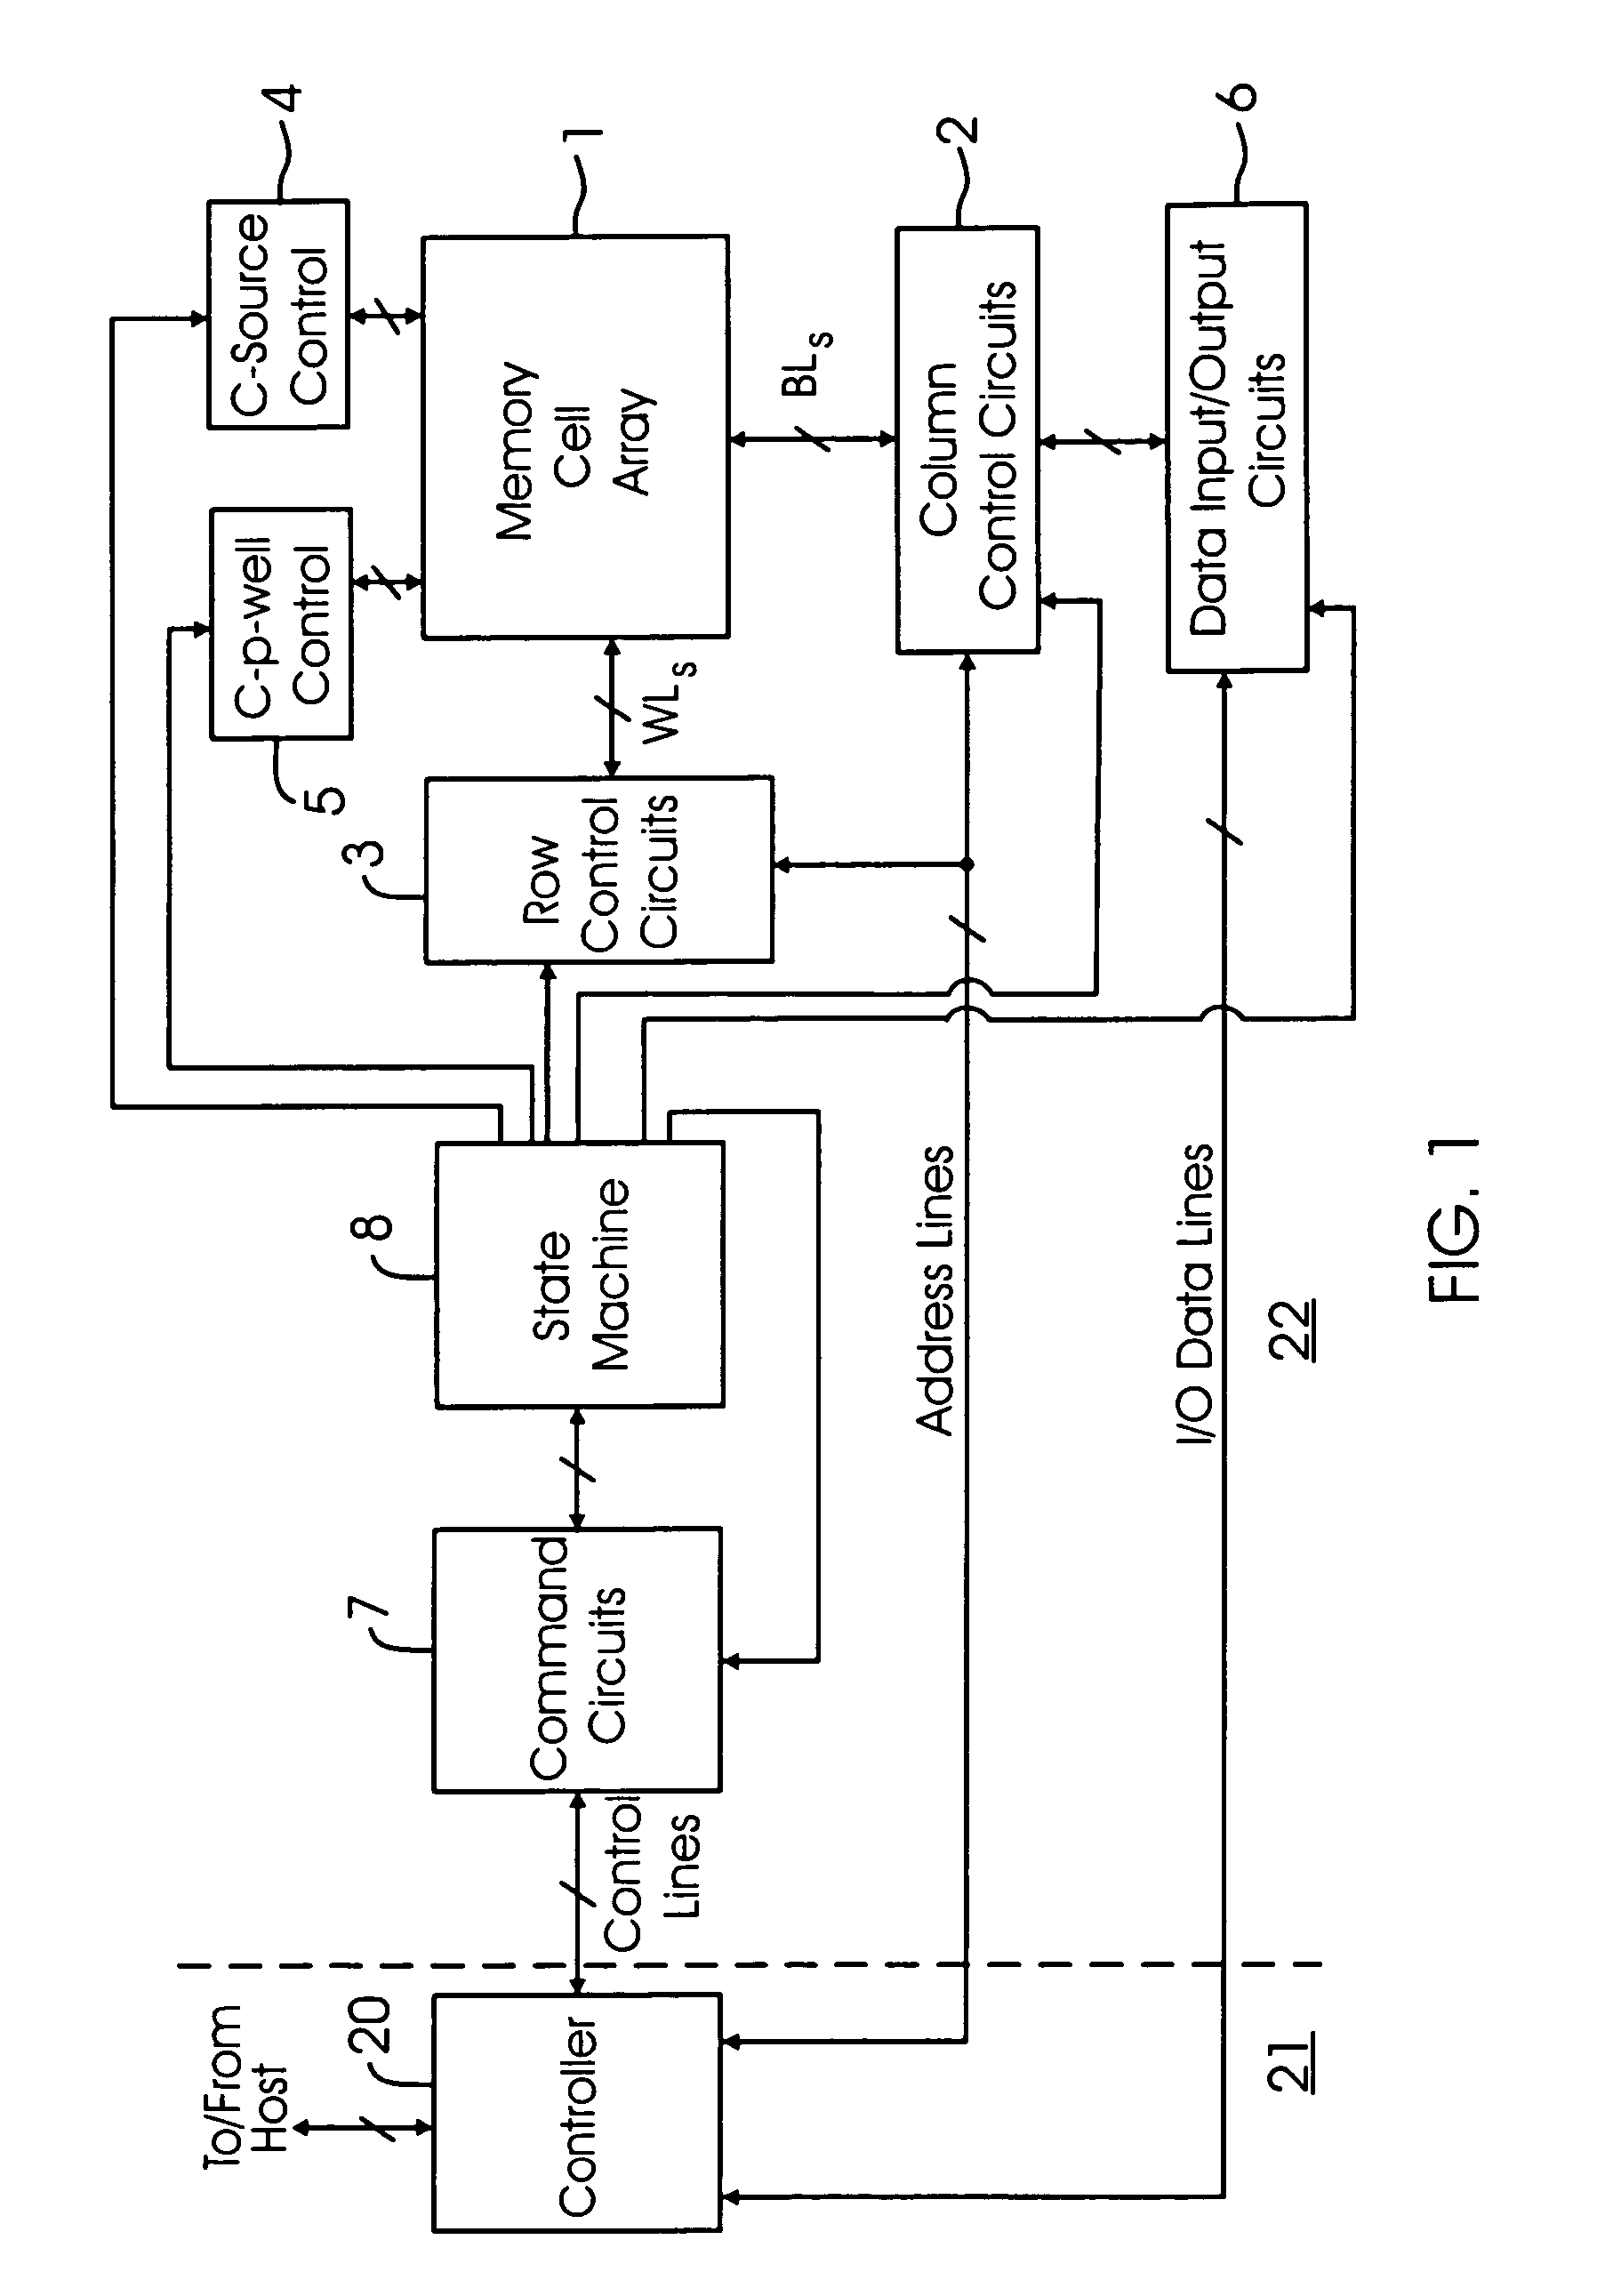 Method and system for programming multi-state non-volatile memory devices